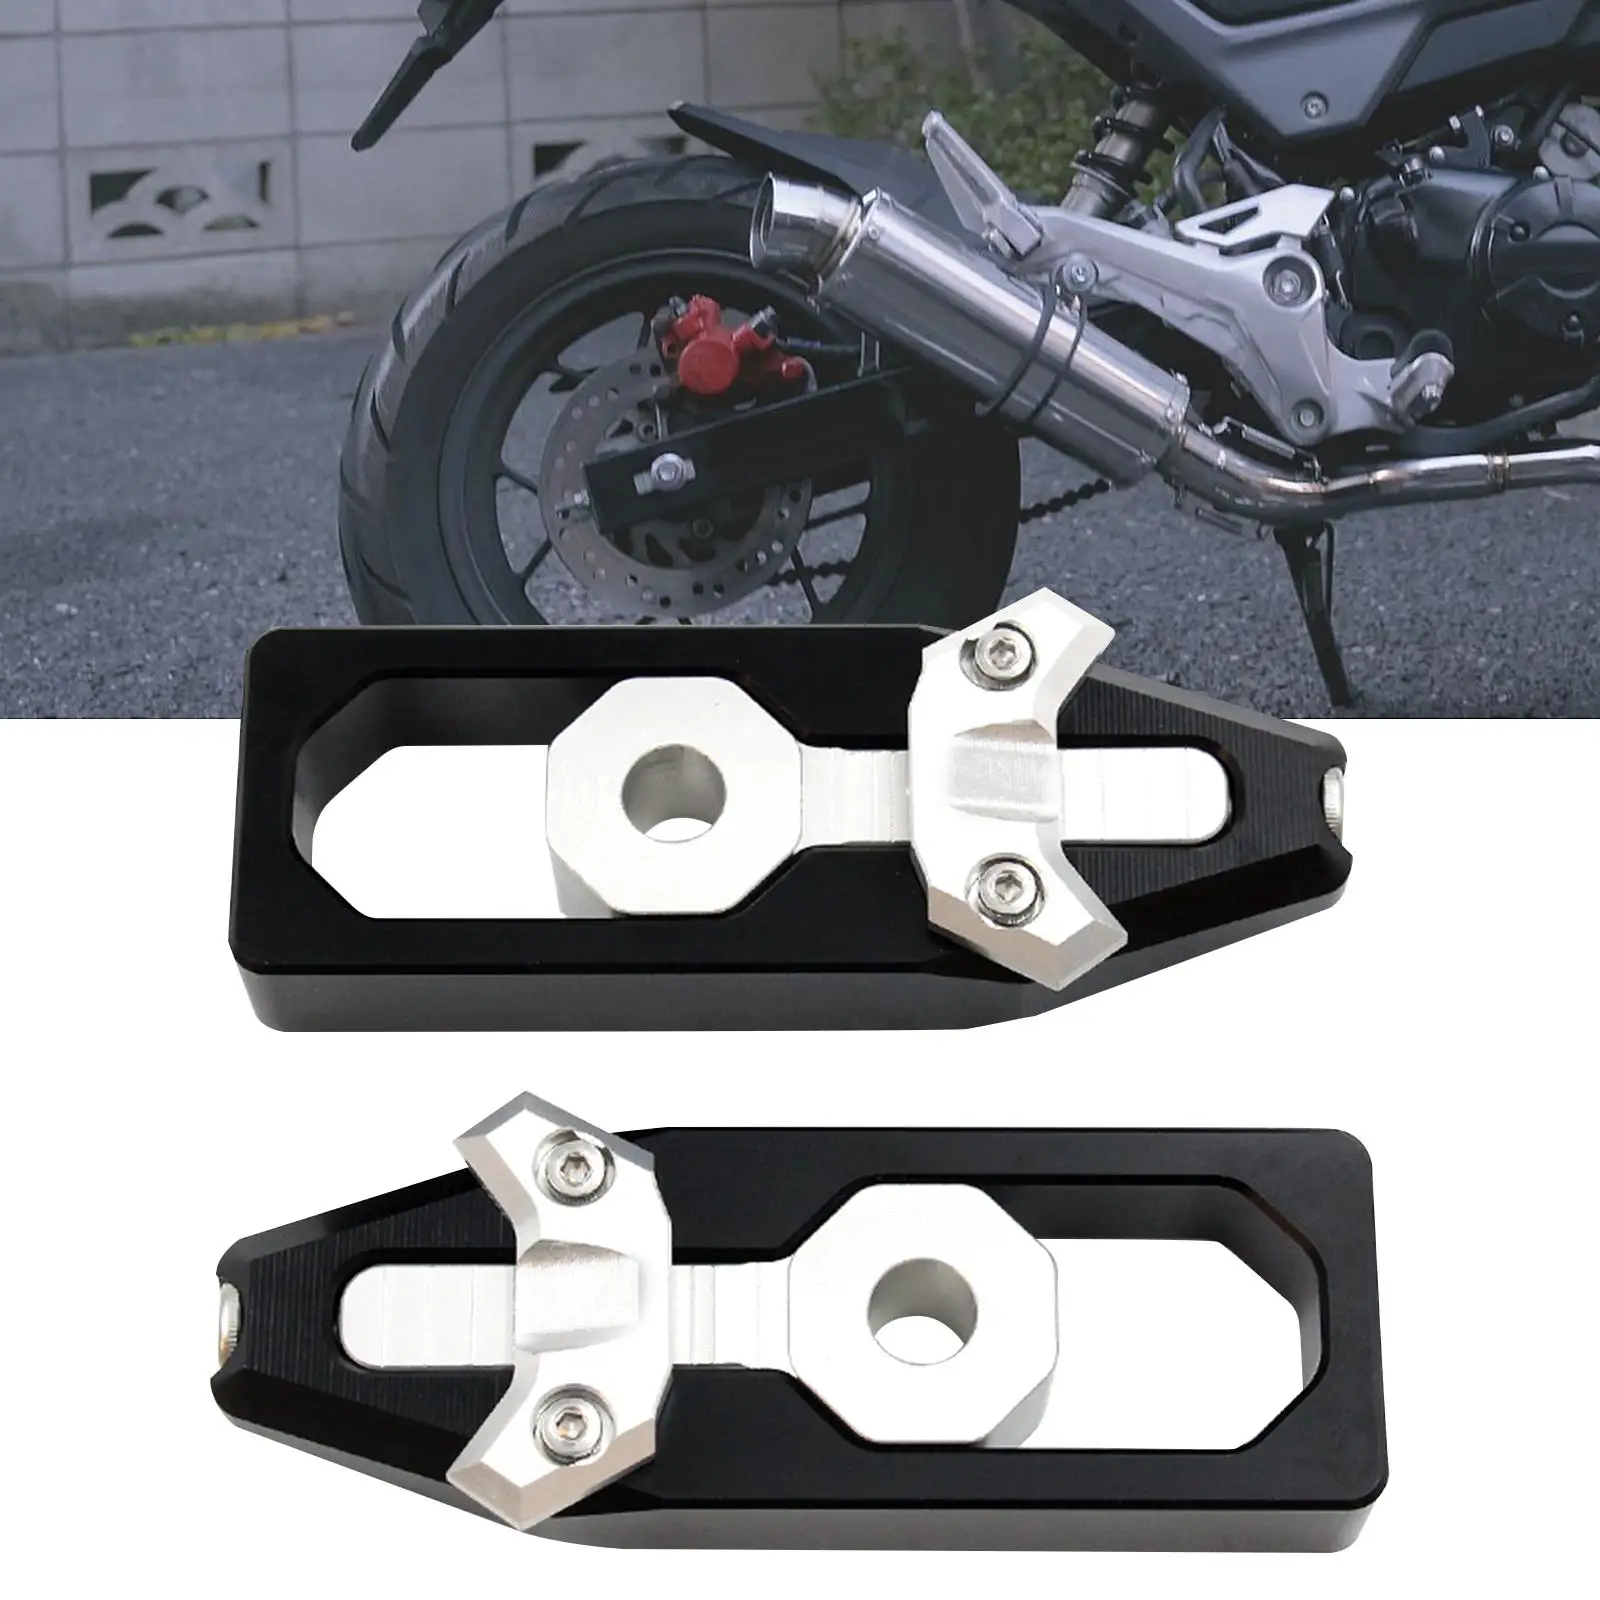 2 Pieces Motor Chain Adjuster set Aluminum Alloy Easy to Install Chain Tensioner for honda 2014-2020 Grom Replacement Parts